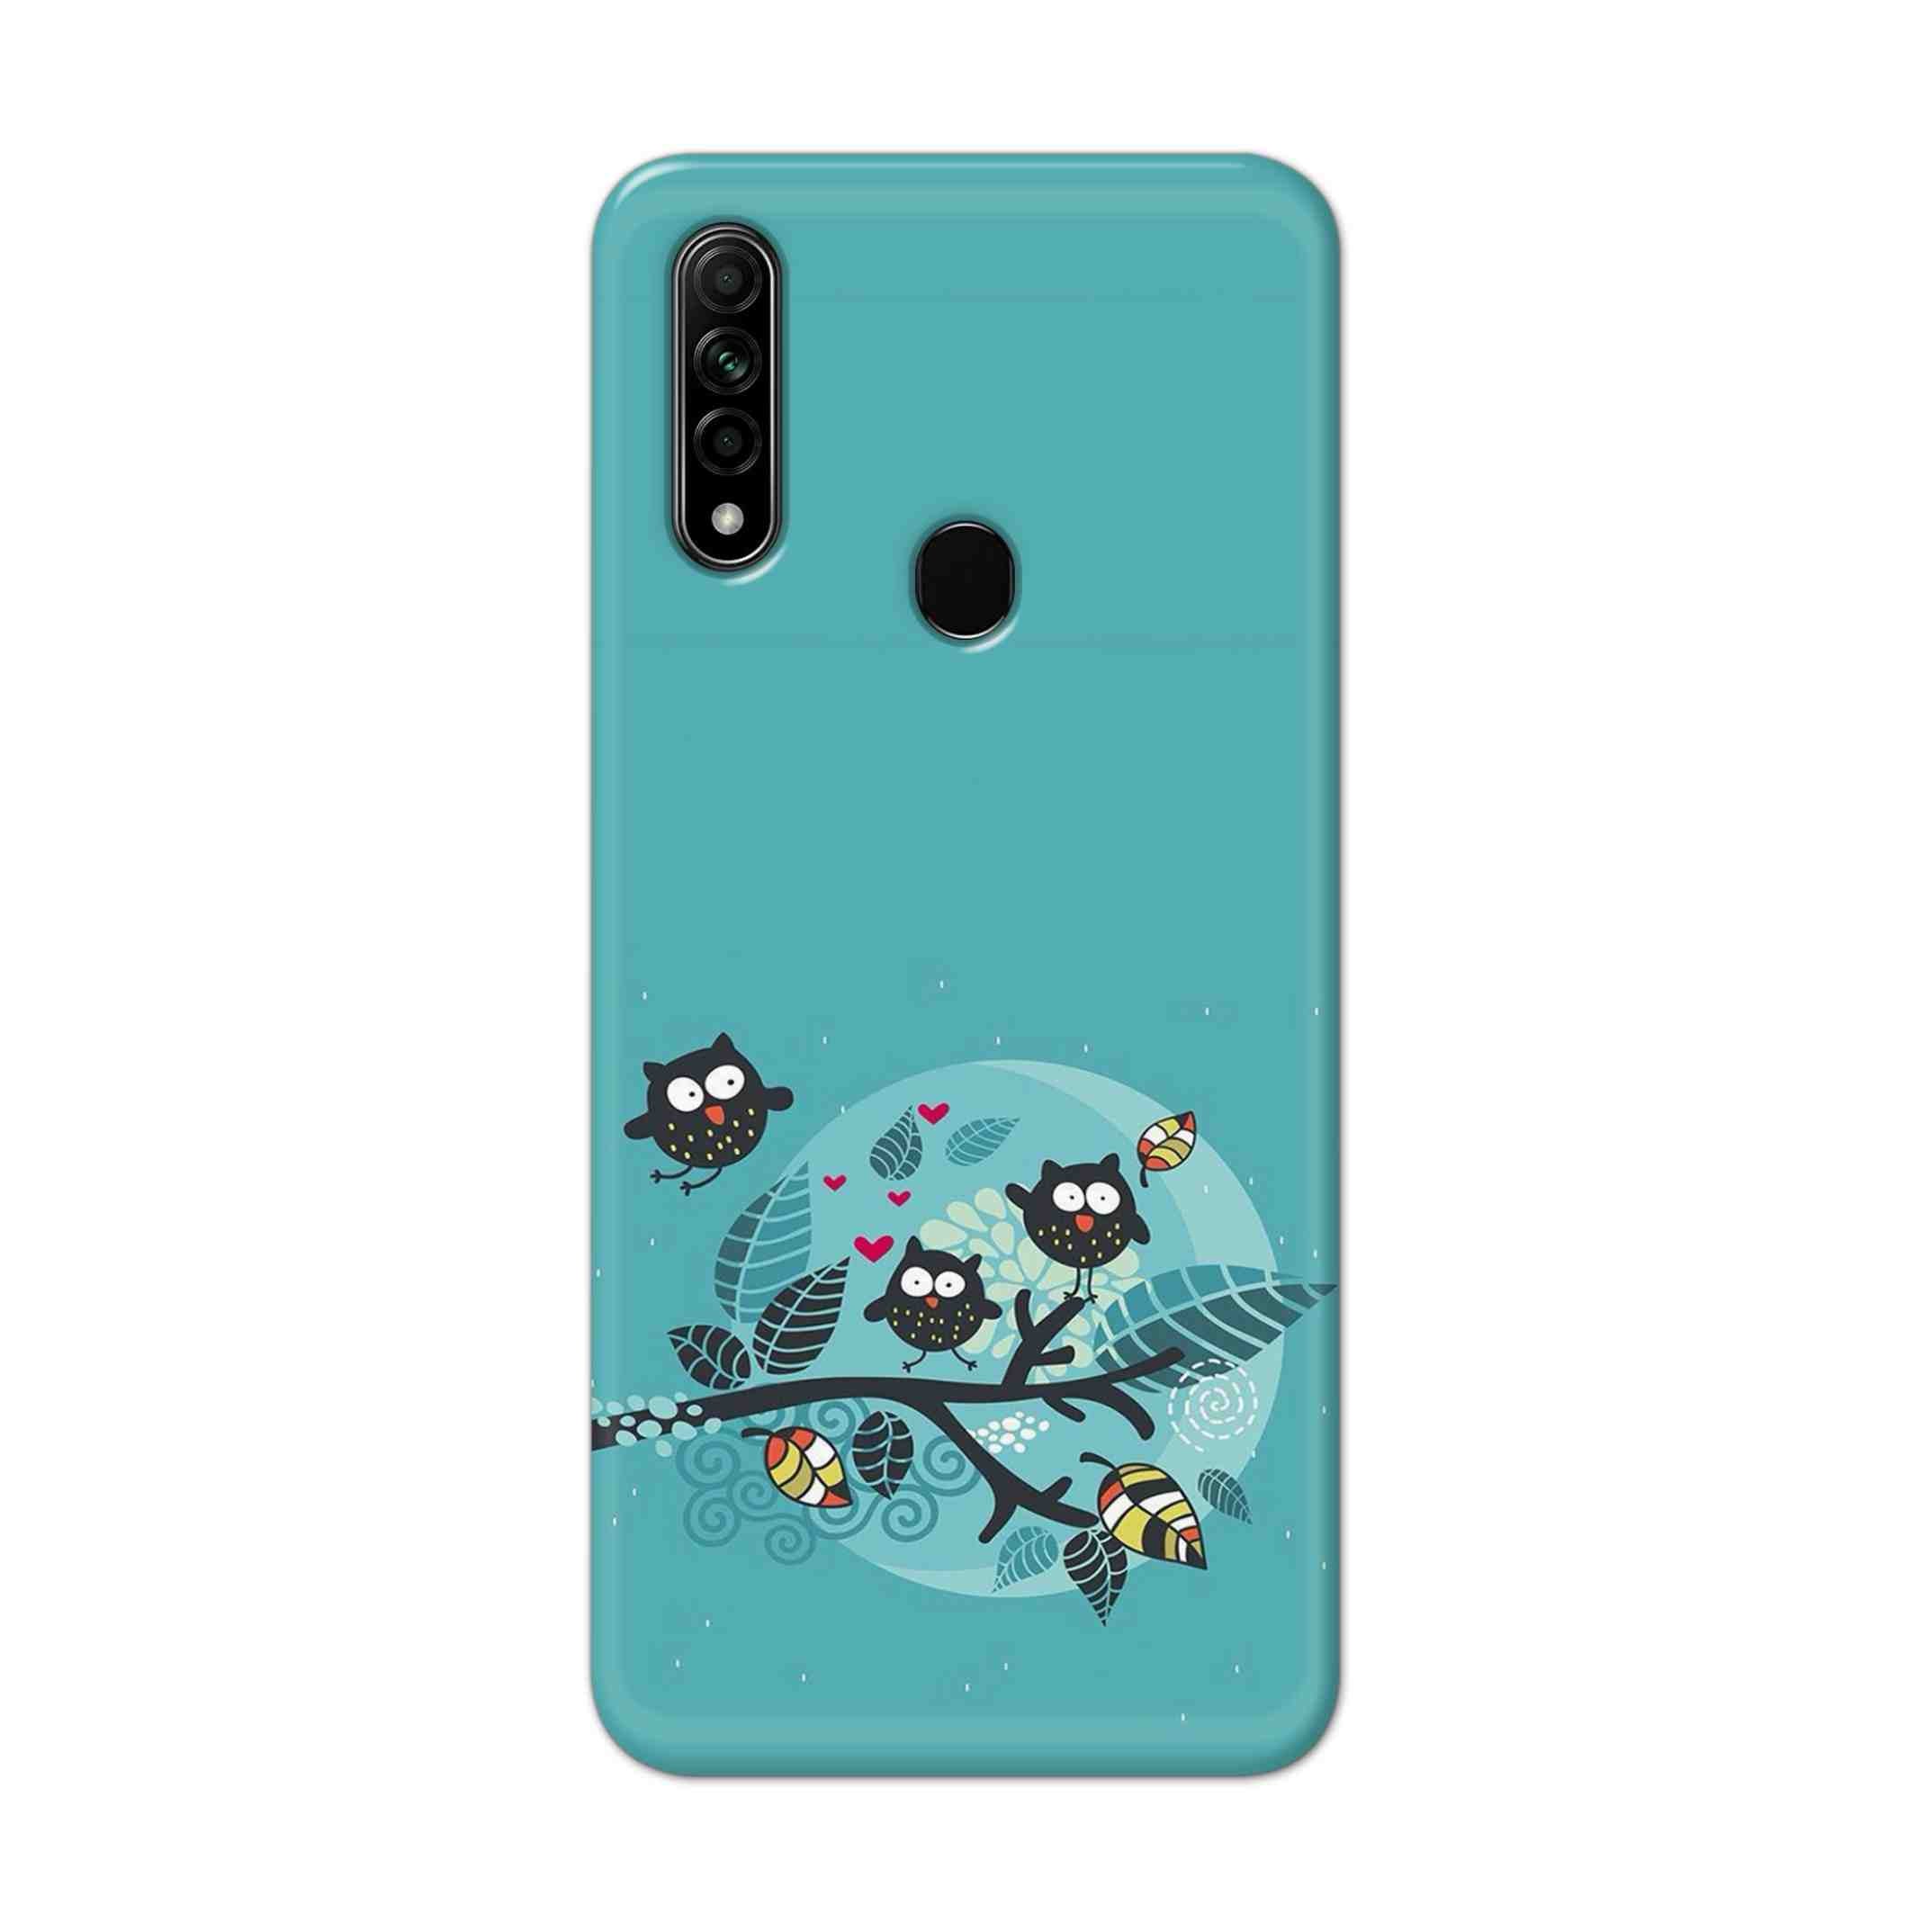 Buy Owl Hard Back Mobile Phone Case Cover For Oppo A31 (2020) Online